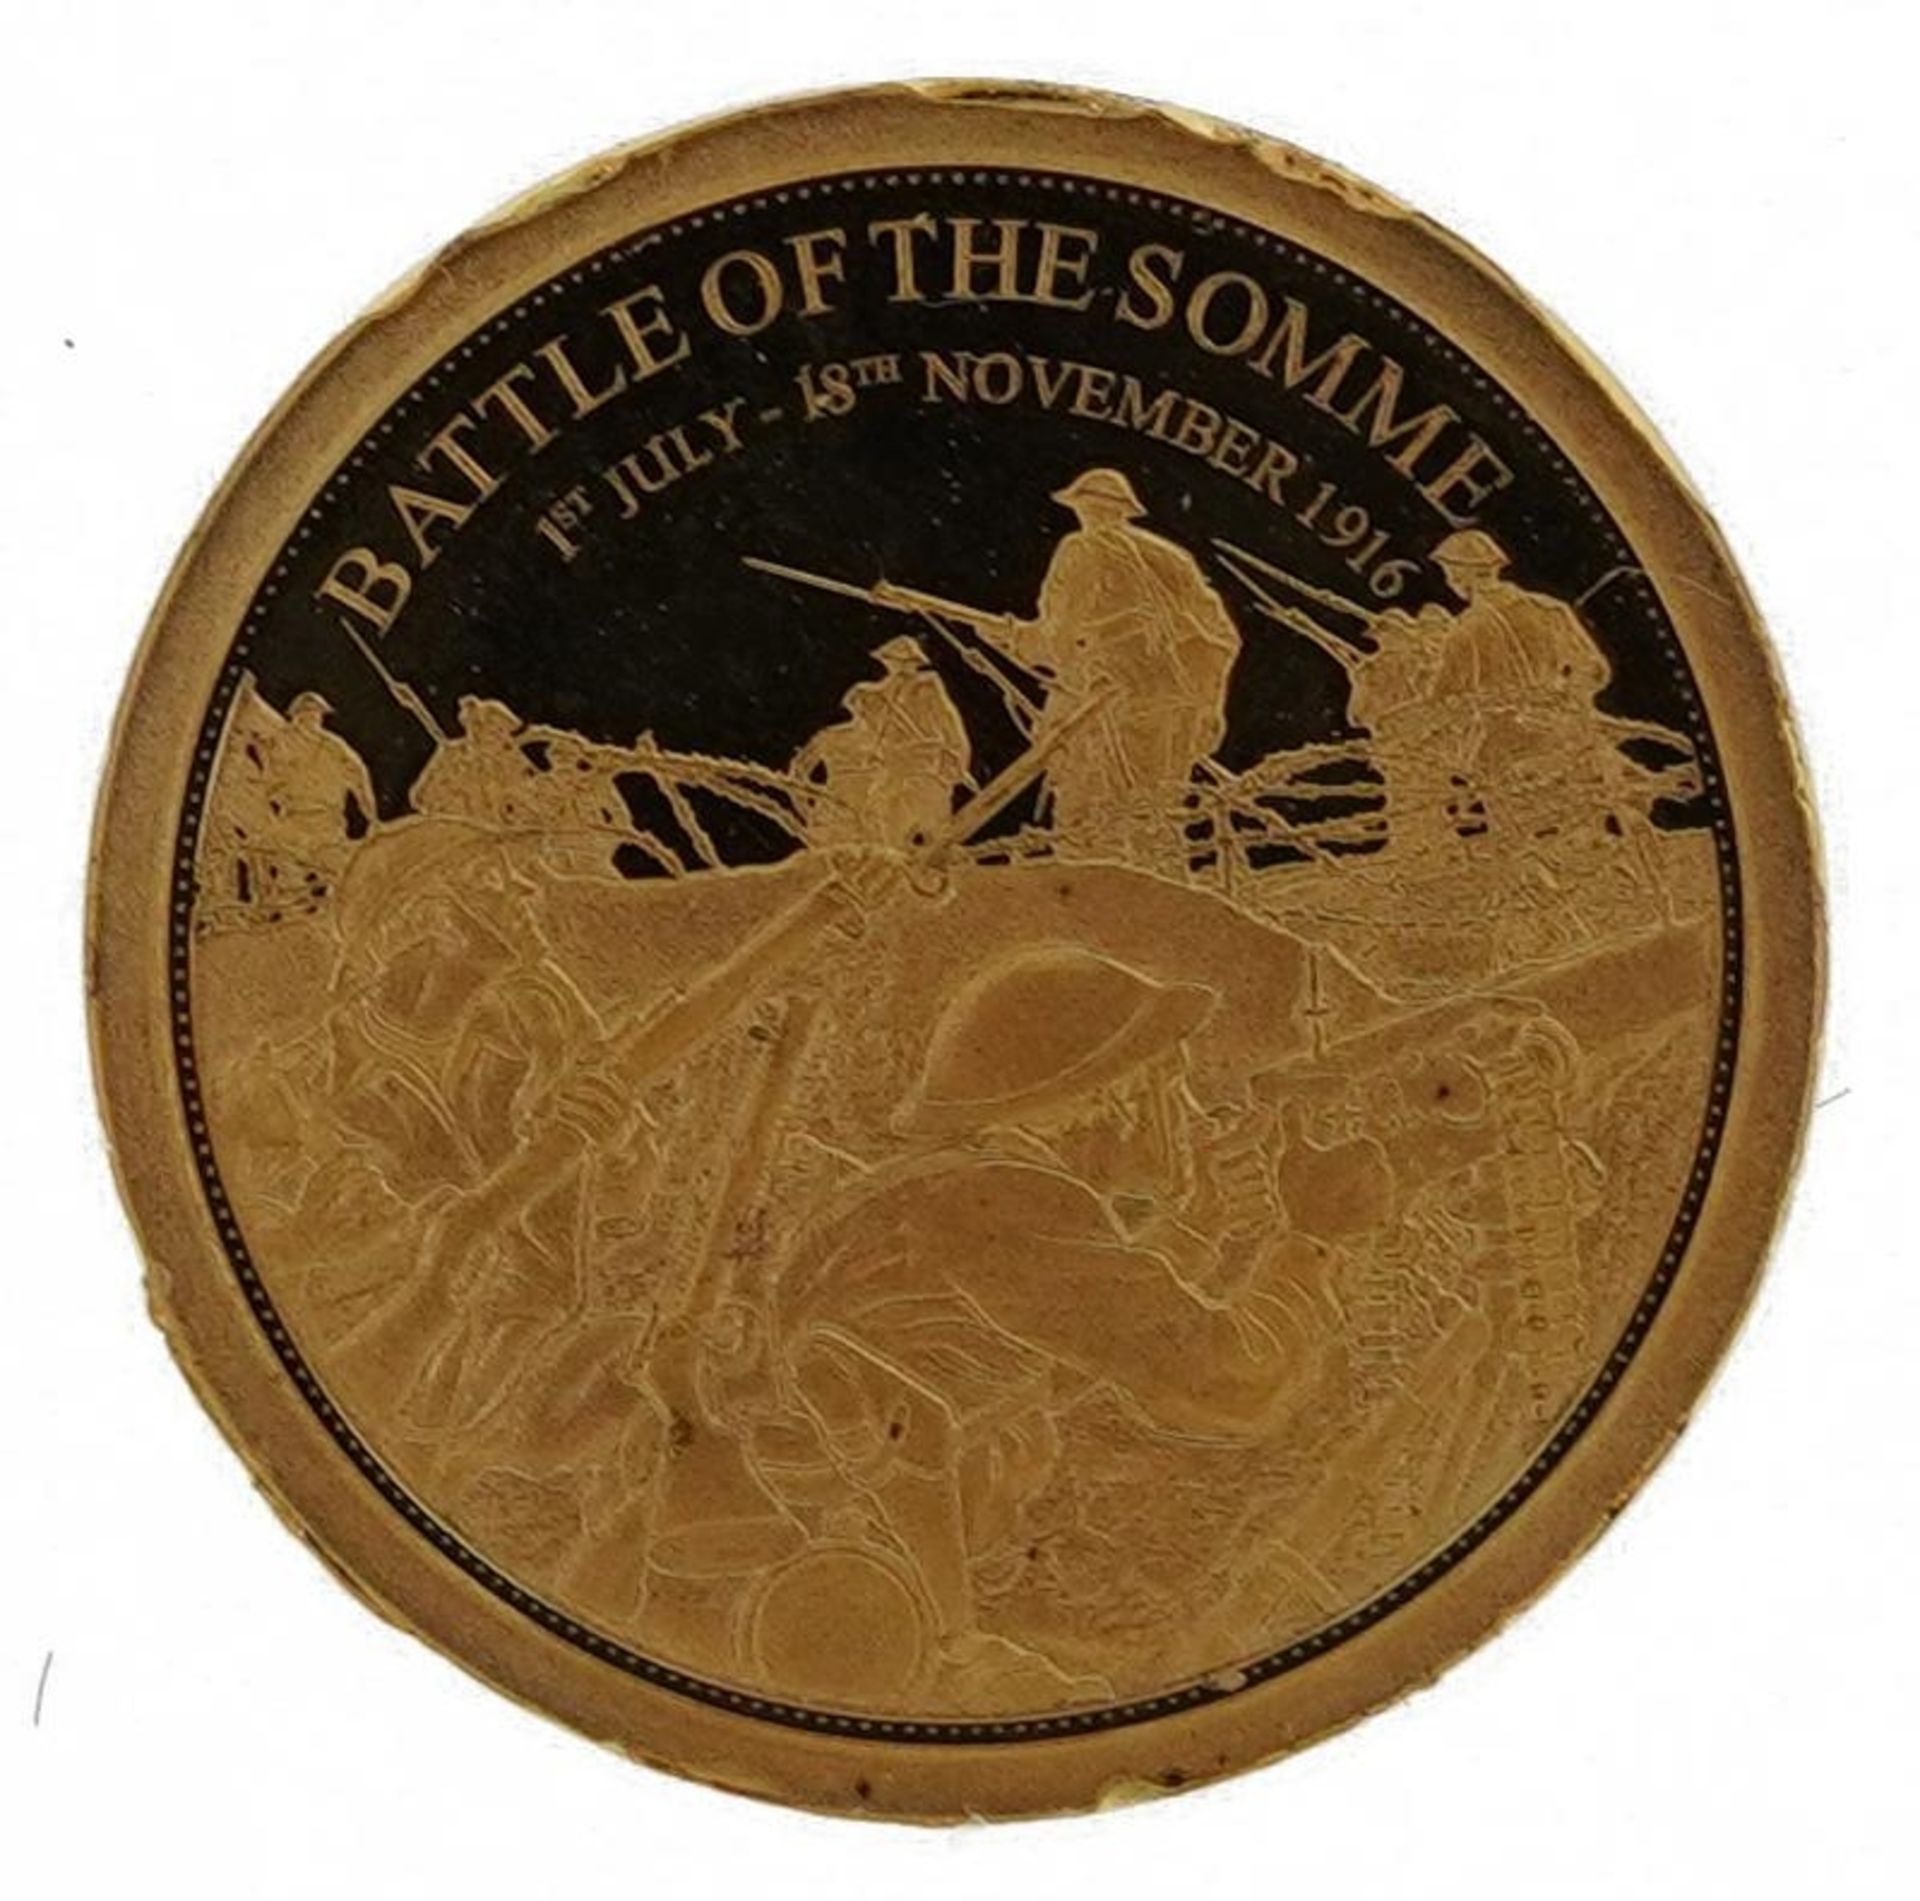 14ct gold History of Britain Battle of the Somme miniature gold coin : For further information on - Image 2 of 4